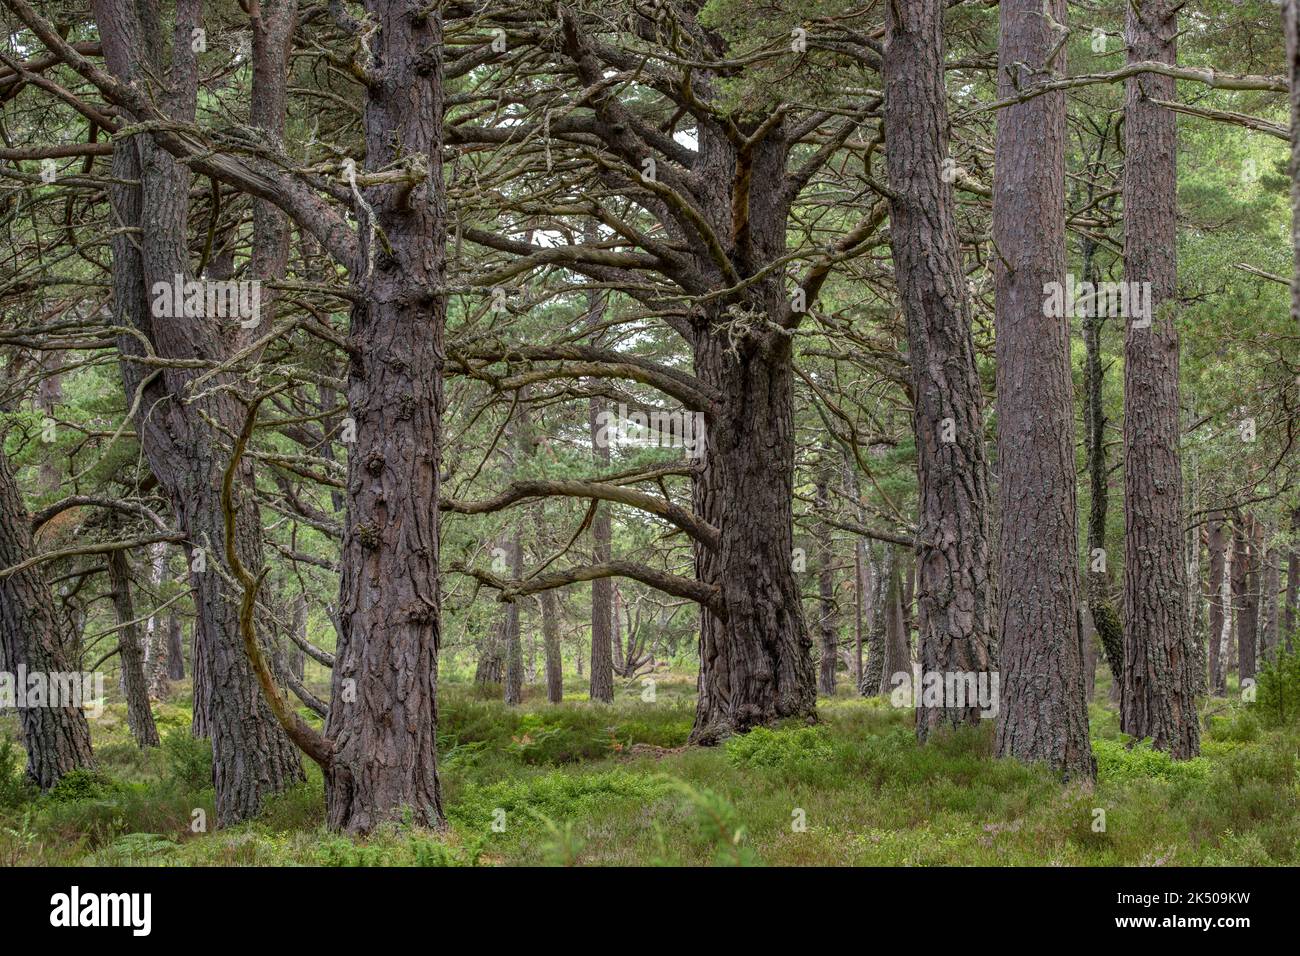 Old Growth Pines Scozzese in Caledonian Pine Forest, Rothiemurchus Estate. Speyside, Cairngorms, Scozia. Foto Stock